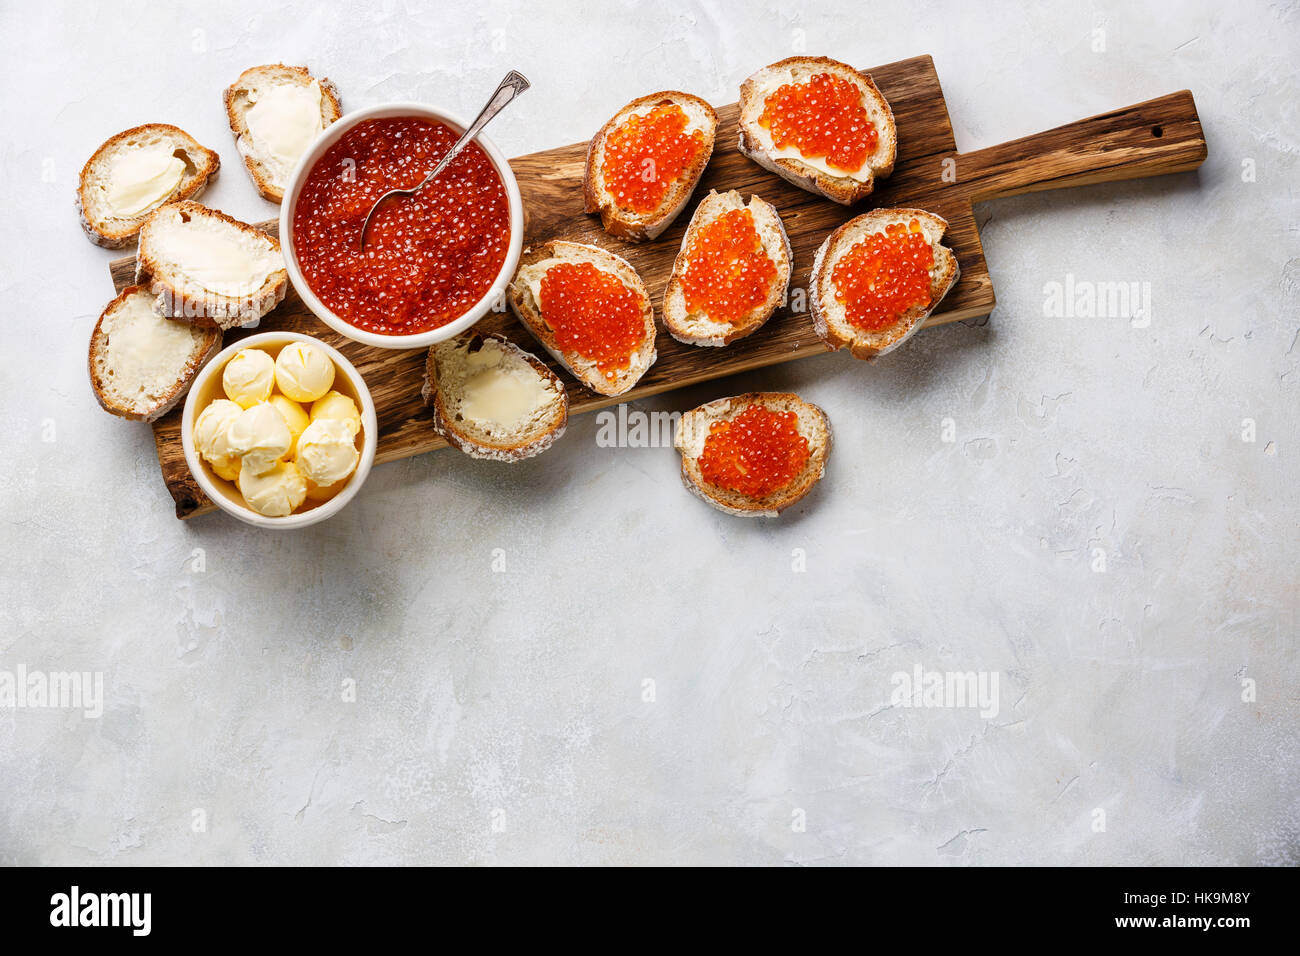 Salmon red caviar in bowl and Sandwiches on wooden cutting board on white background copy space Stock Photo